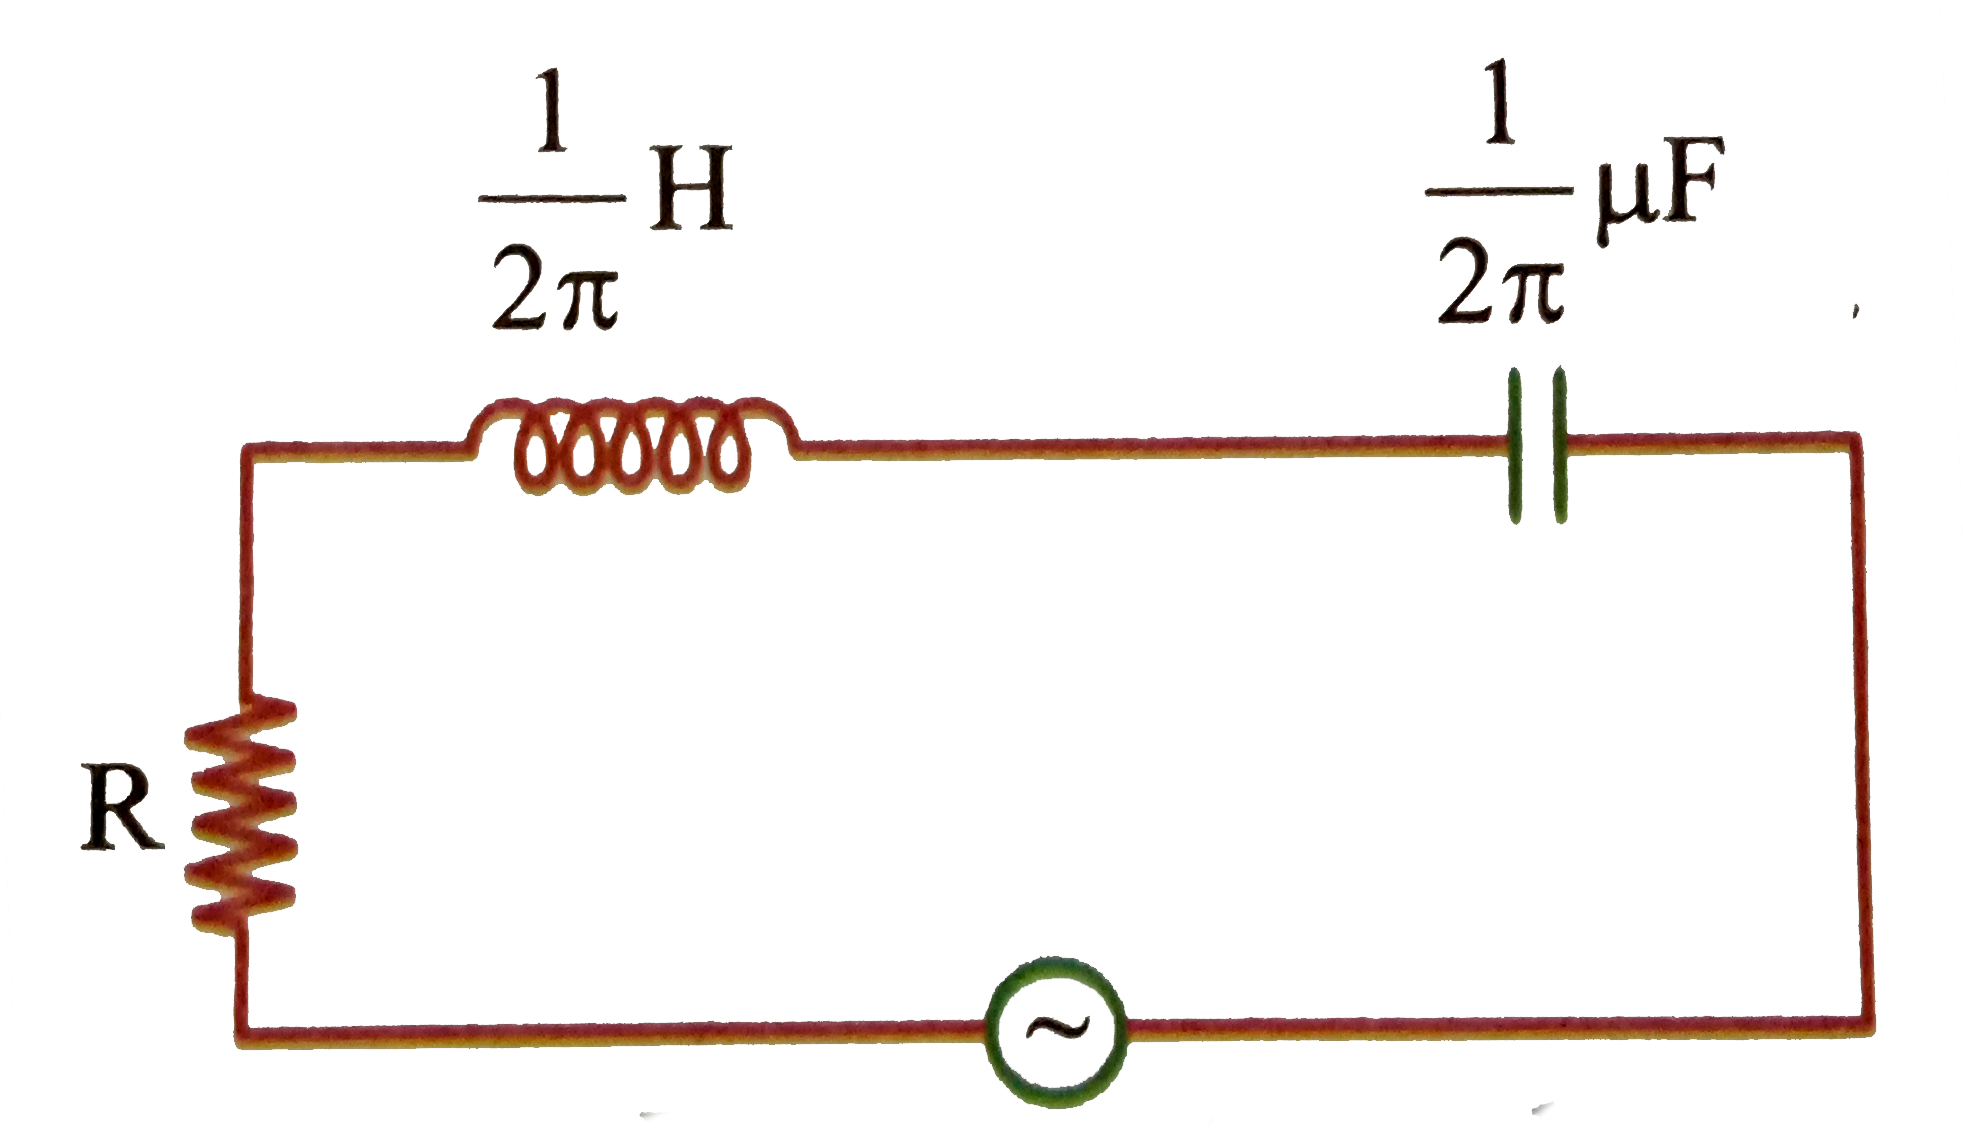 In a series LCR circuit